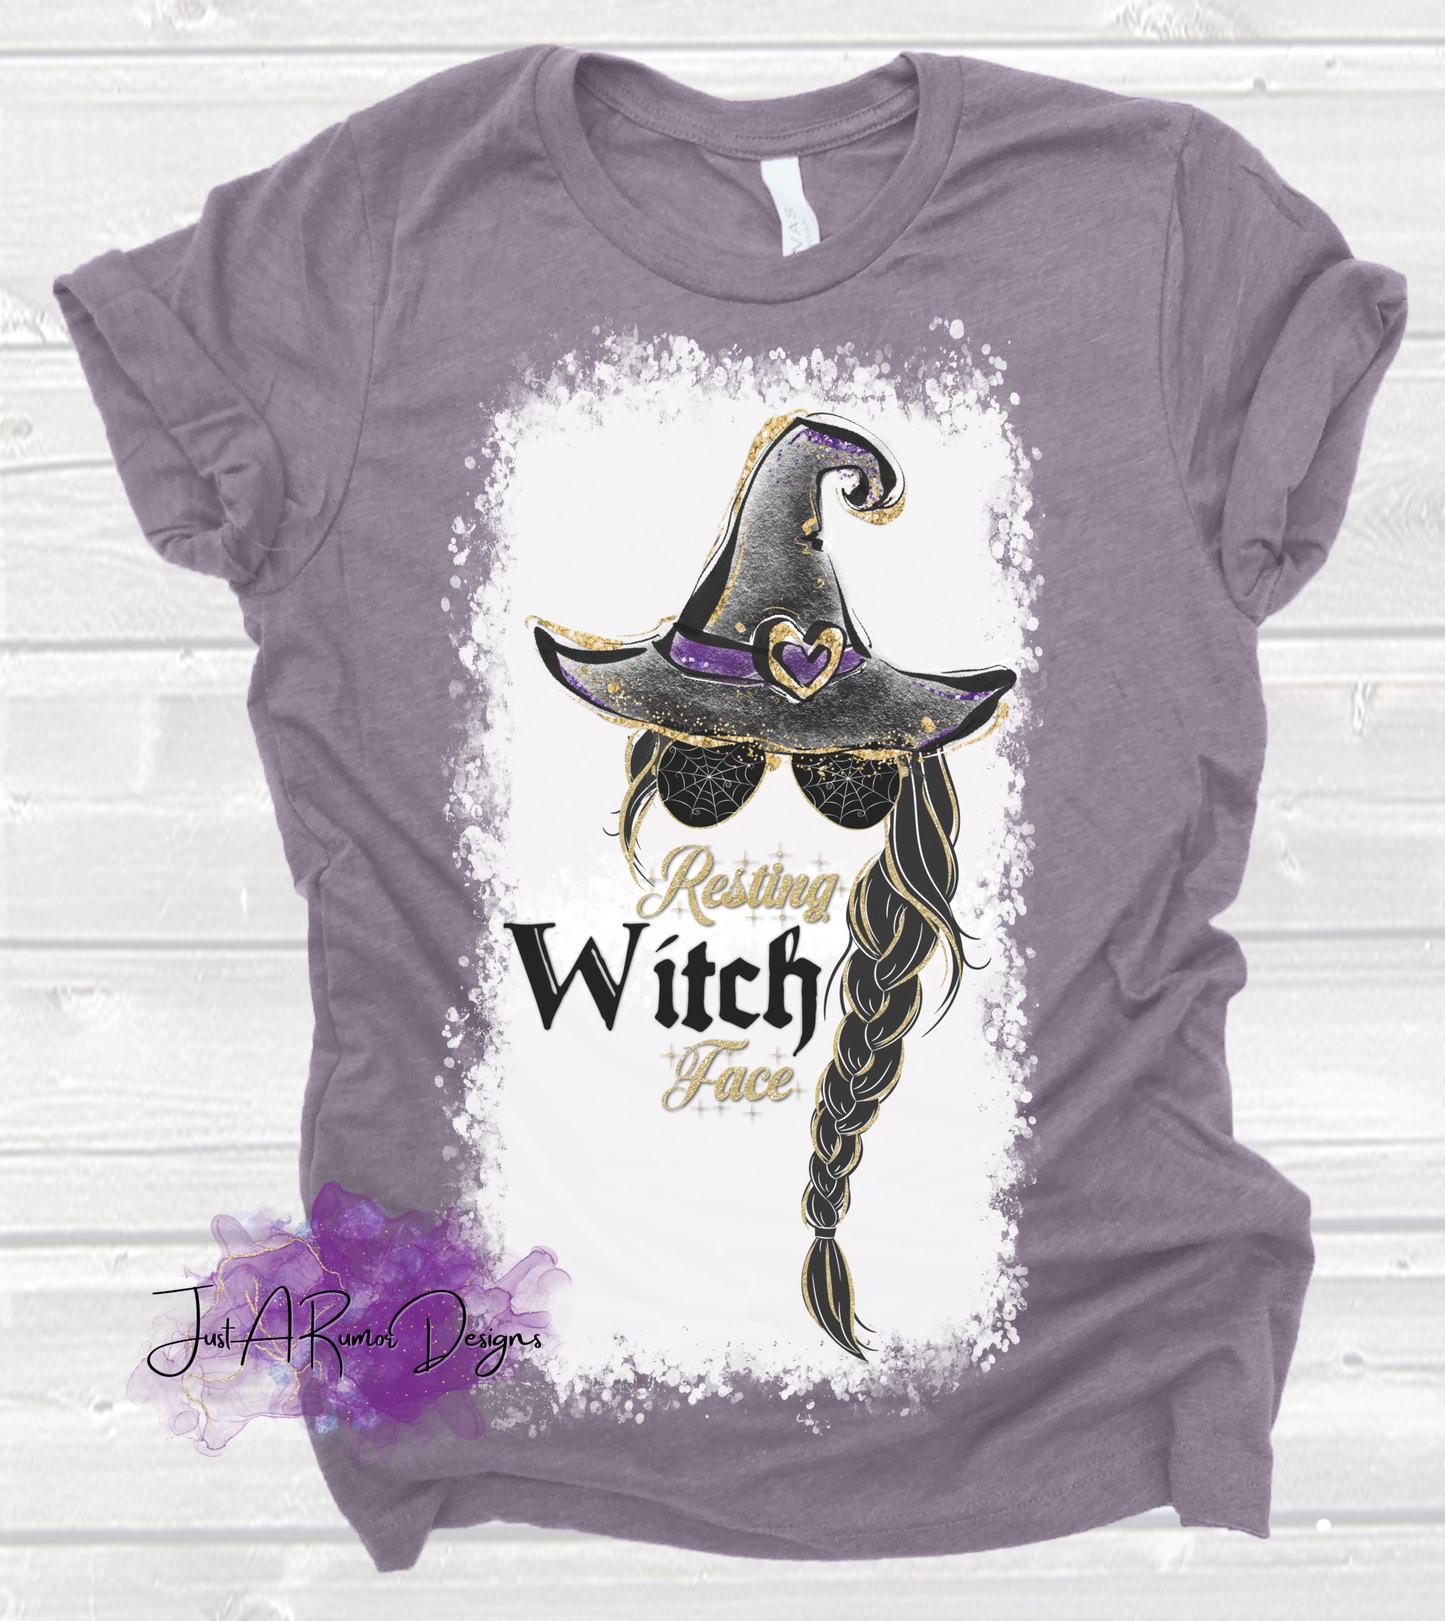 Braid Resting Witch Face Shirt